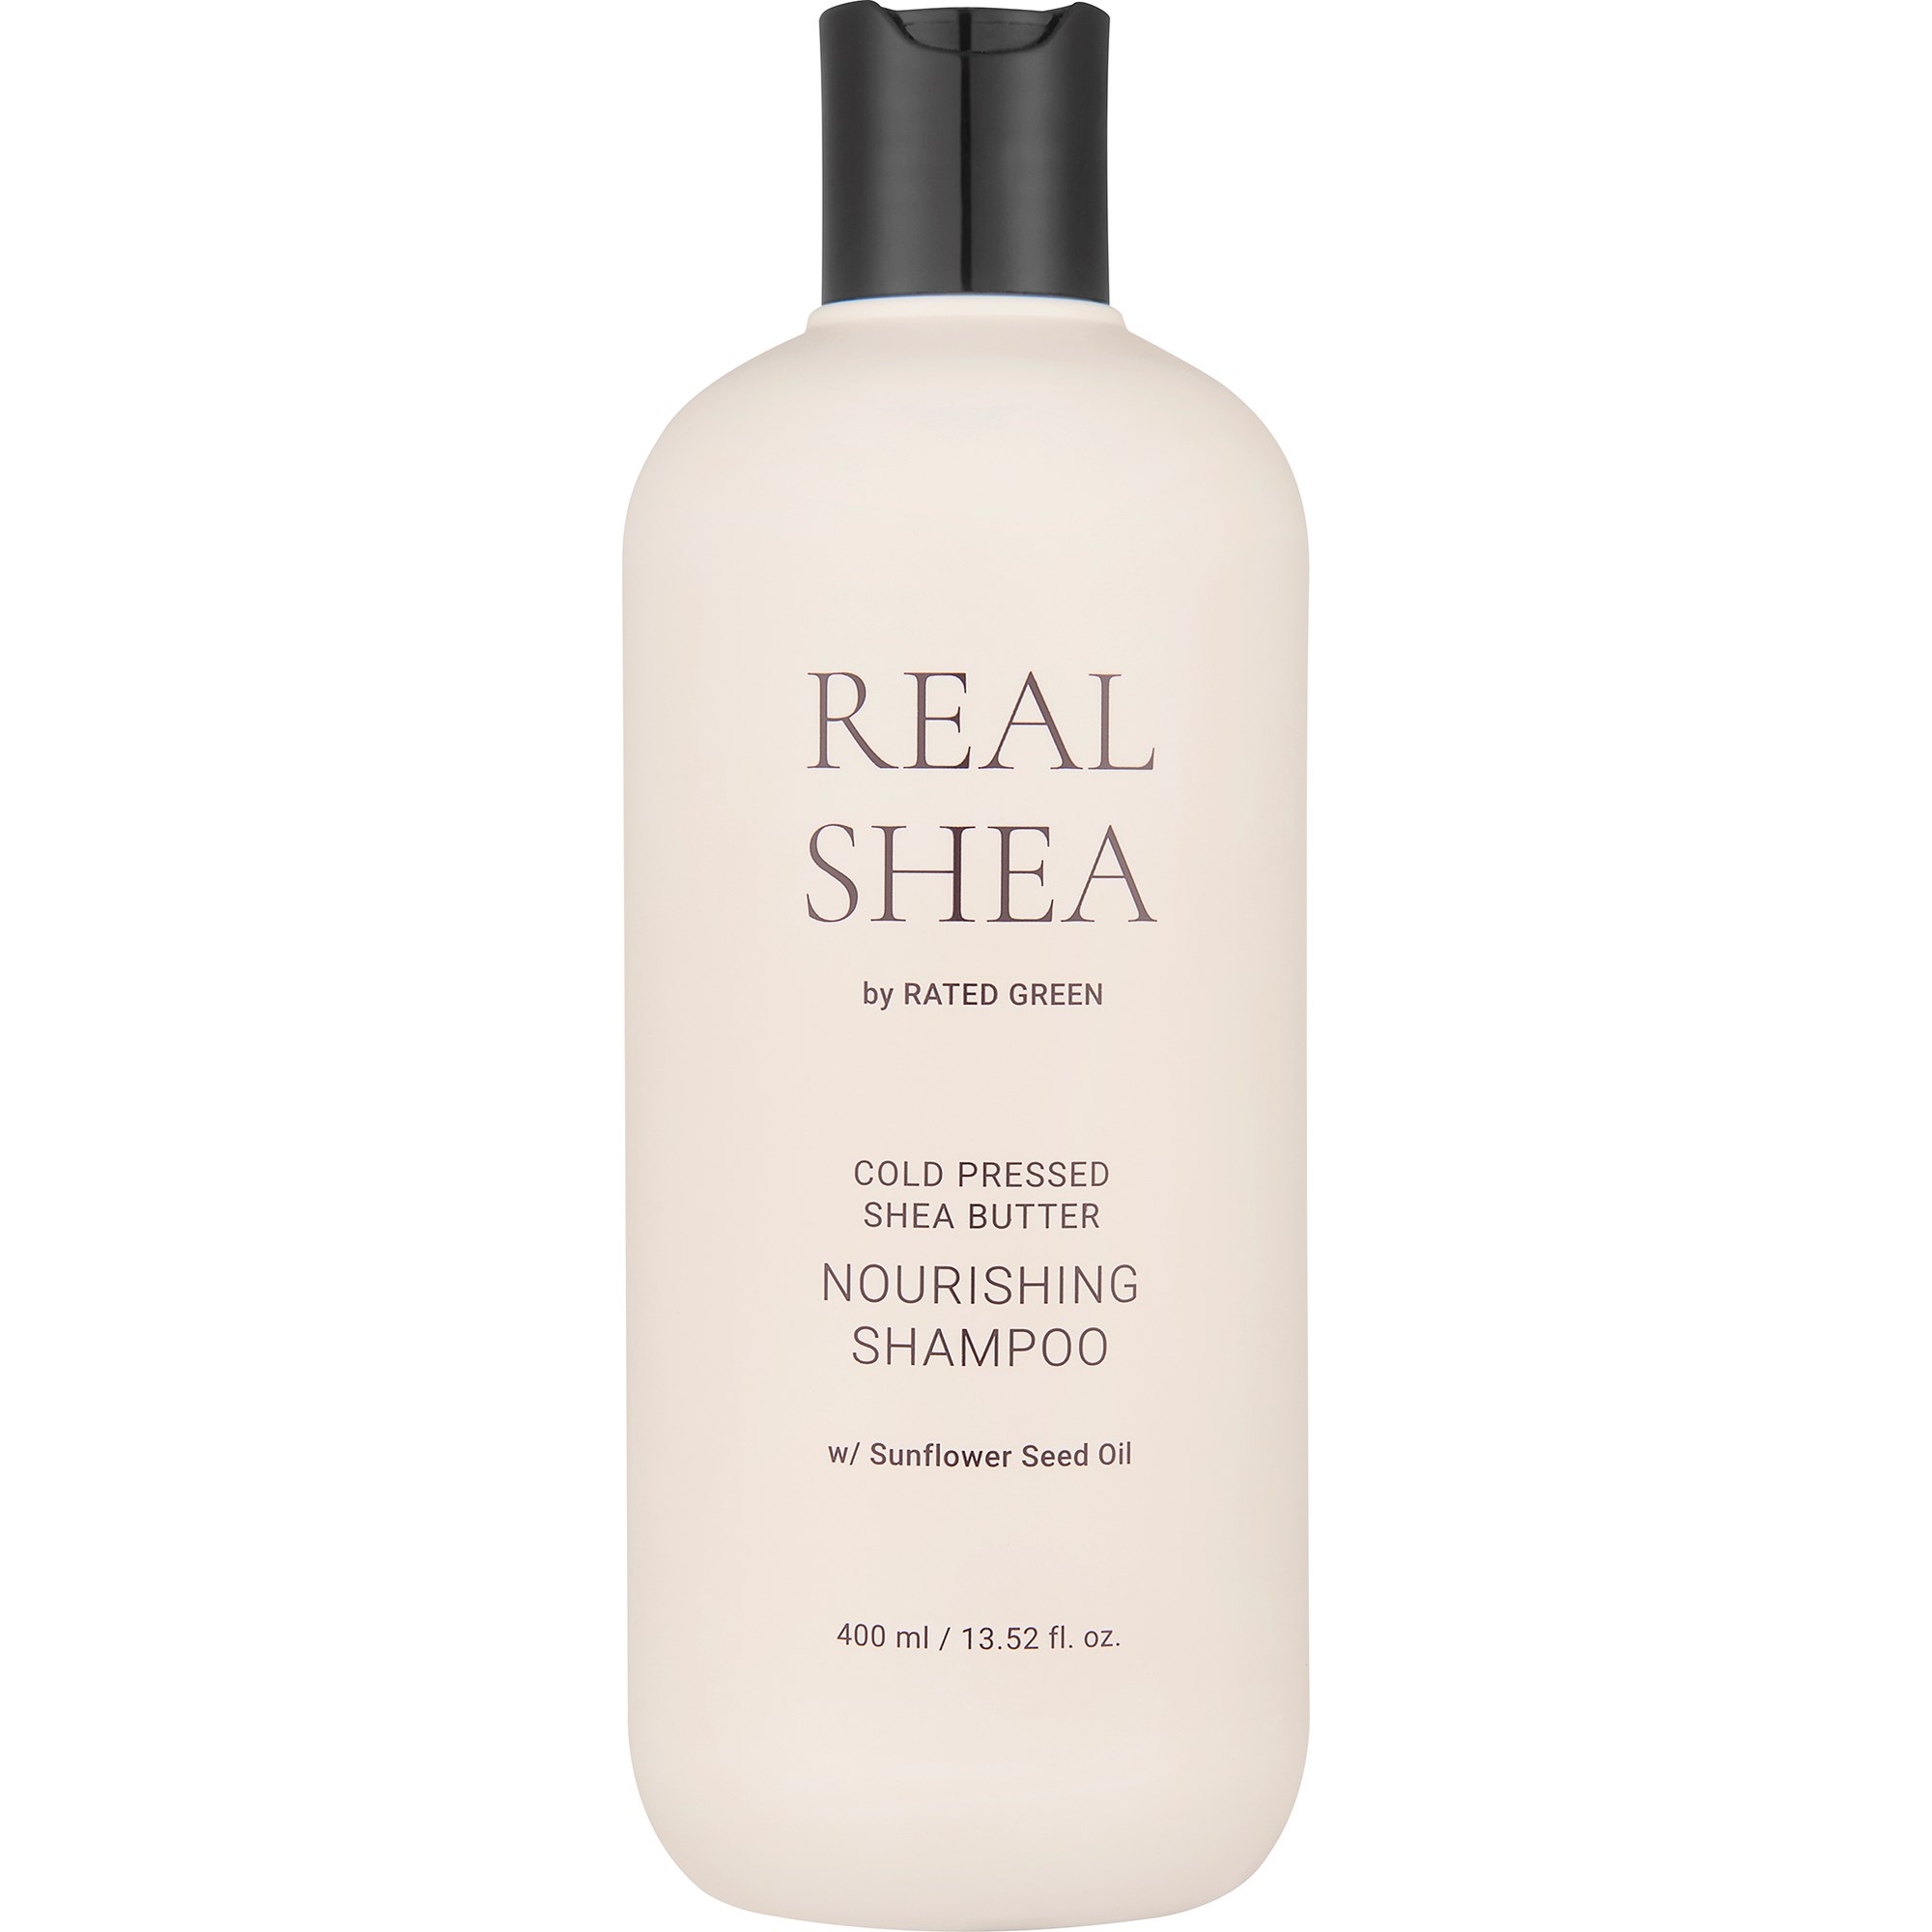 Läs mer om Rated Green Real Shea Cold Pressed Shea Butter Nourishing Shampoo 400